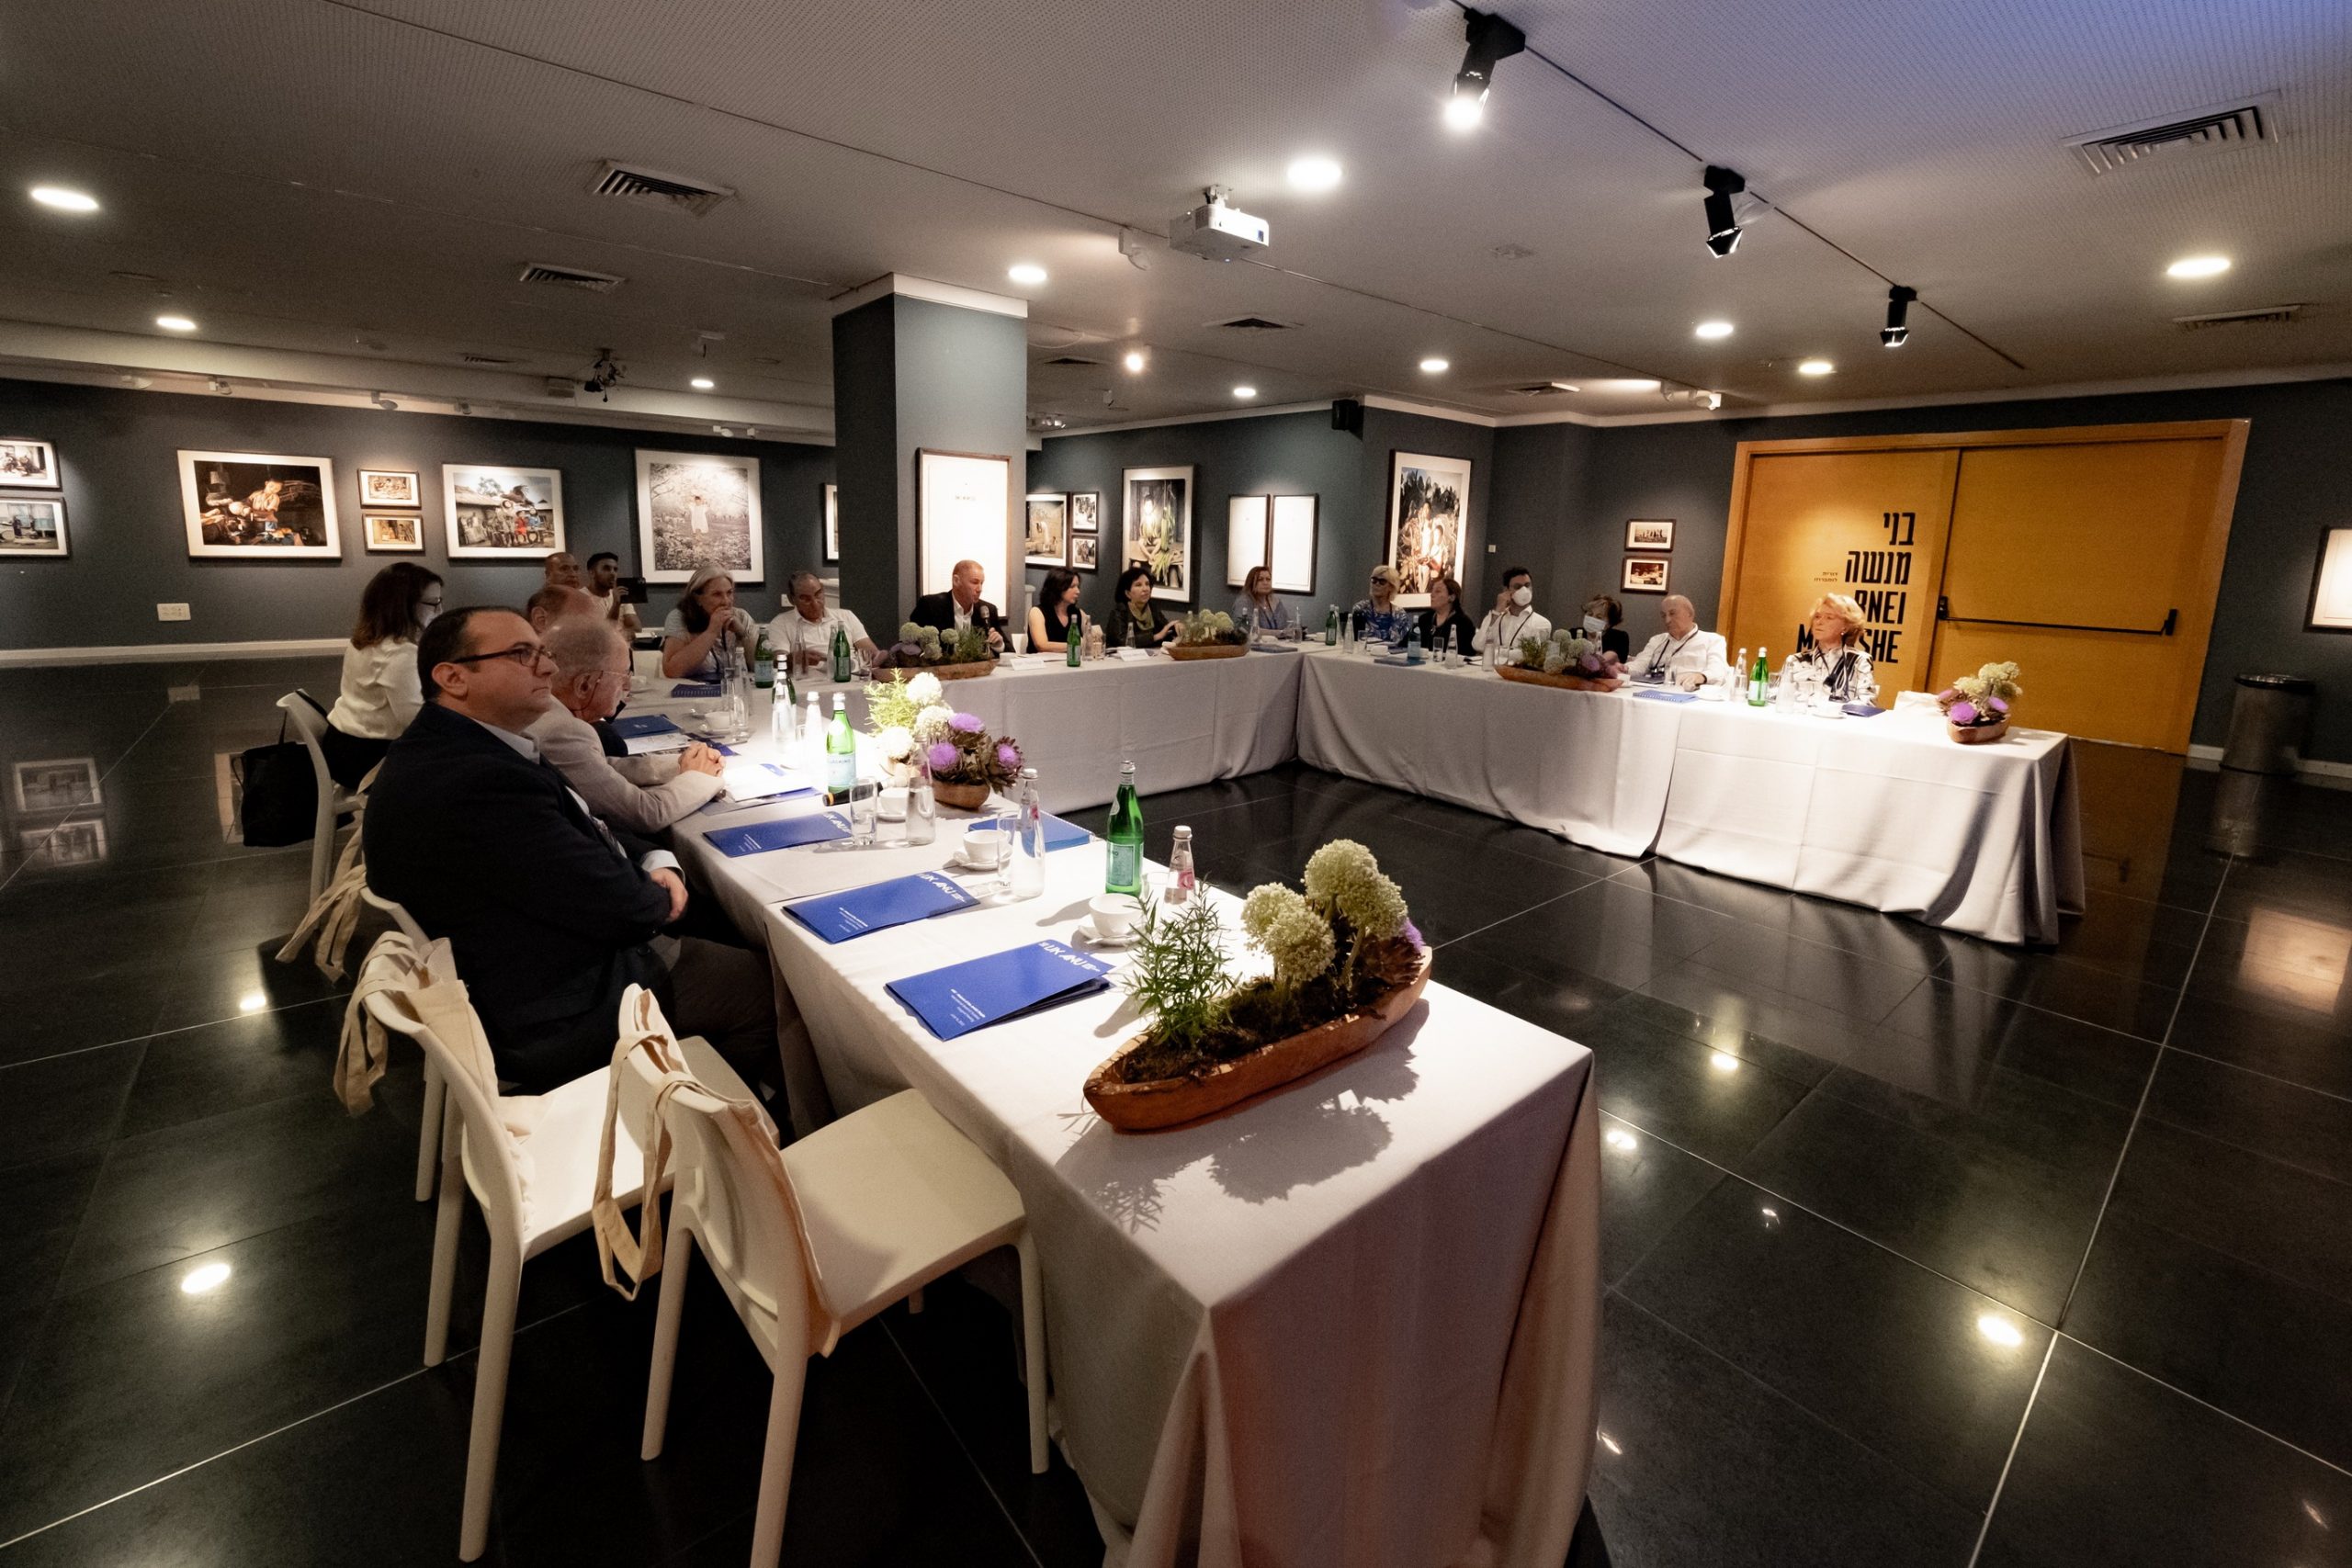 Board meeting at the museum (Photo by Benny Sahar)